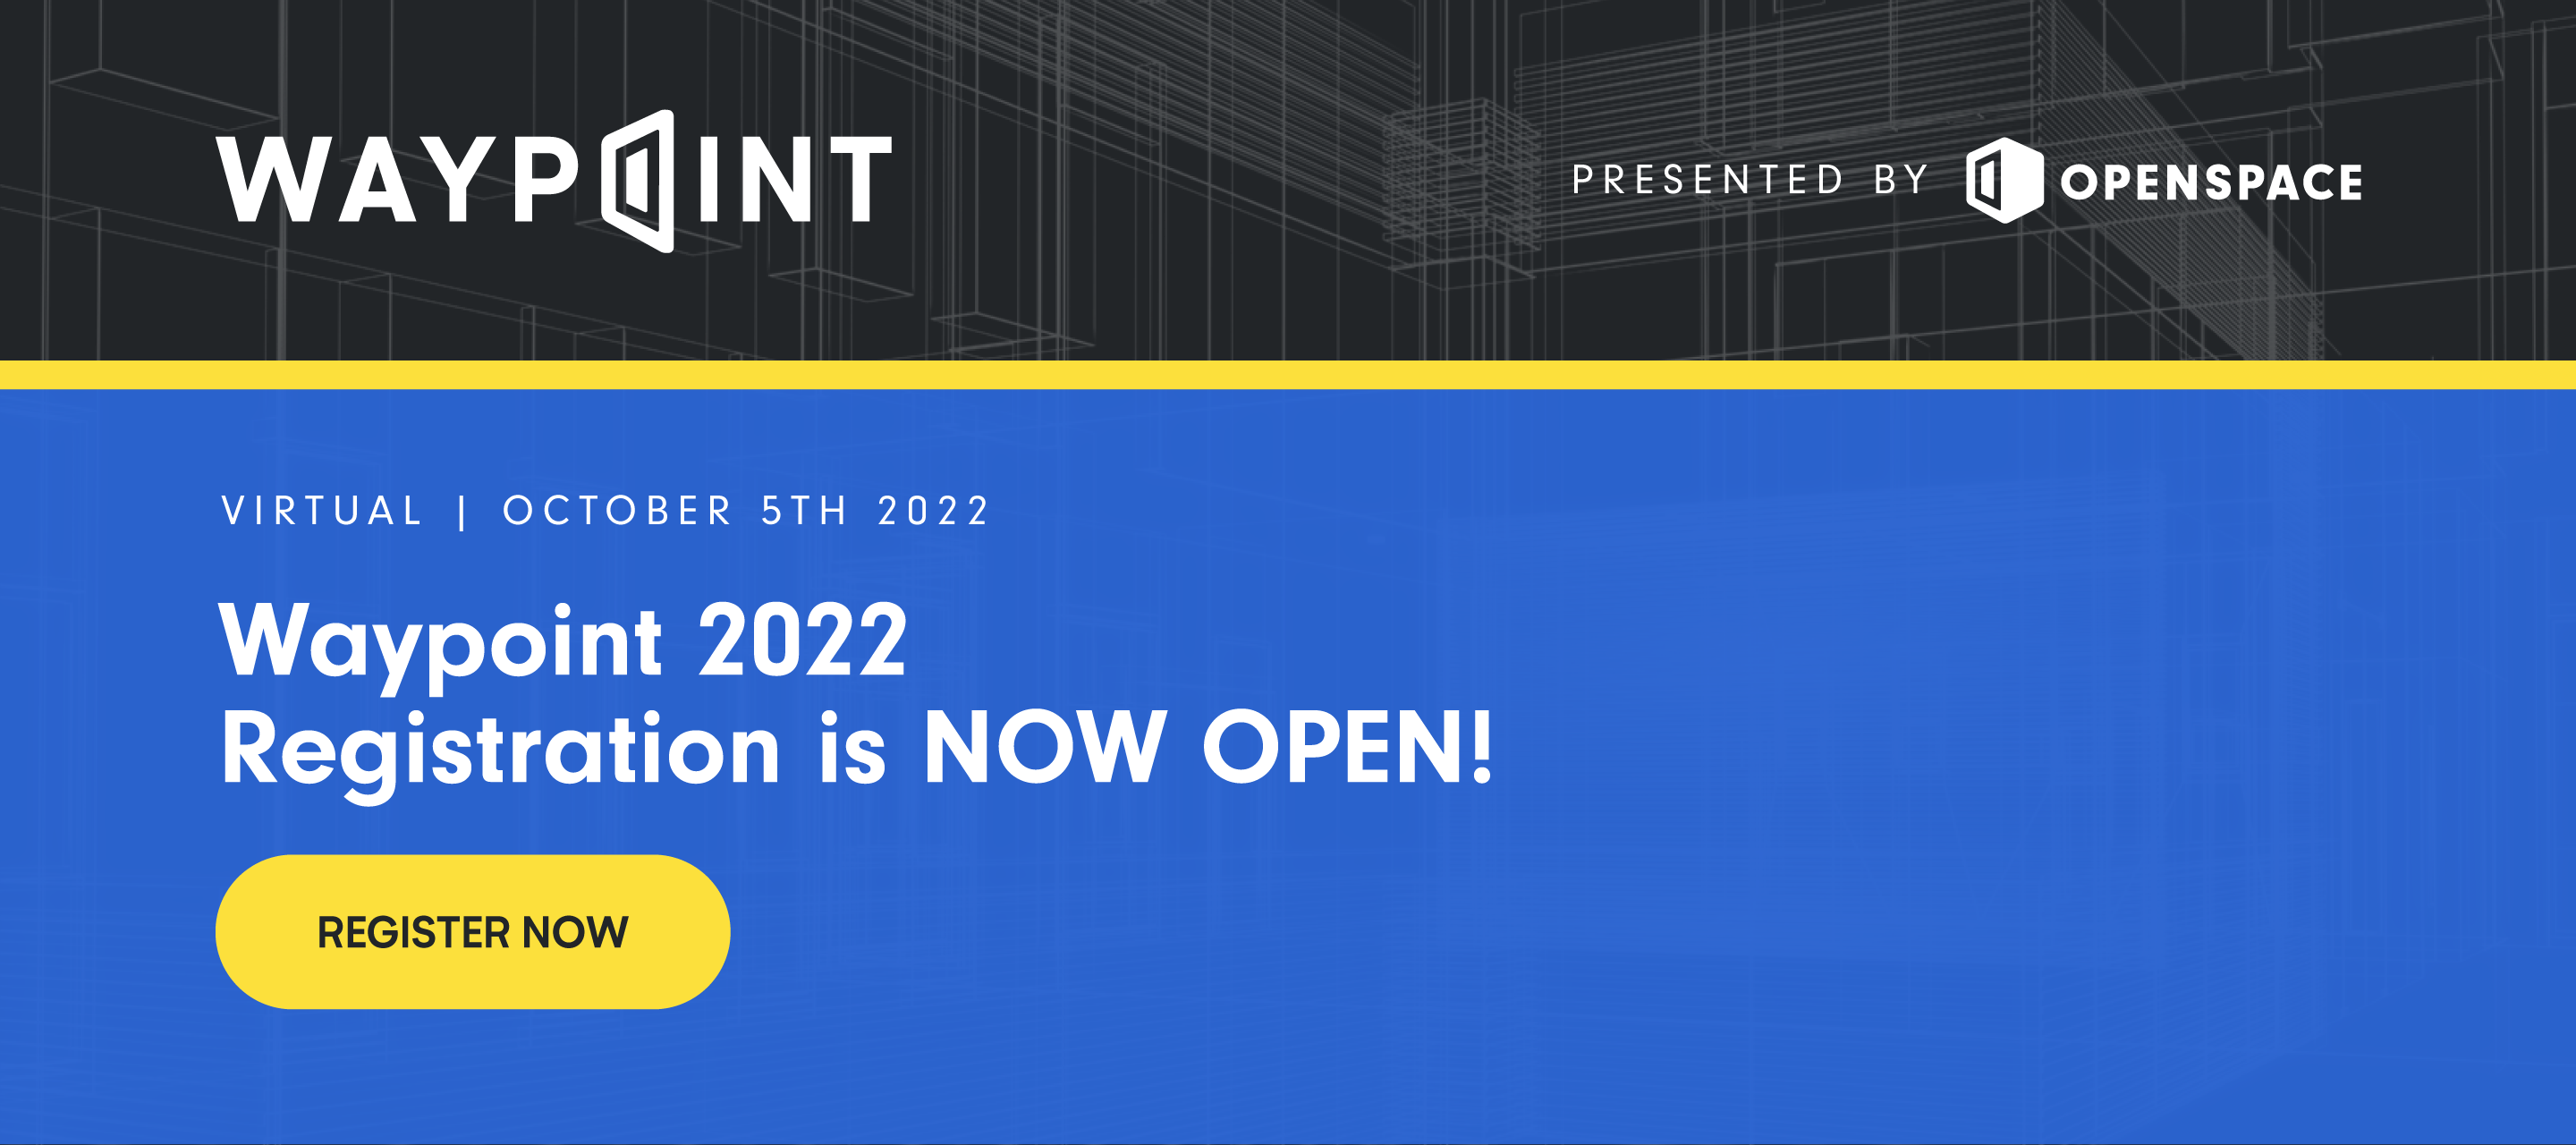 Registration for Waypoint 2022 is Now Open!!!